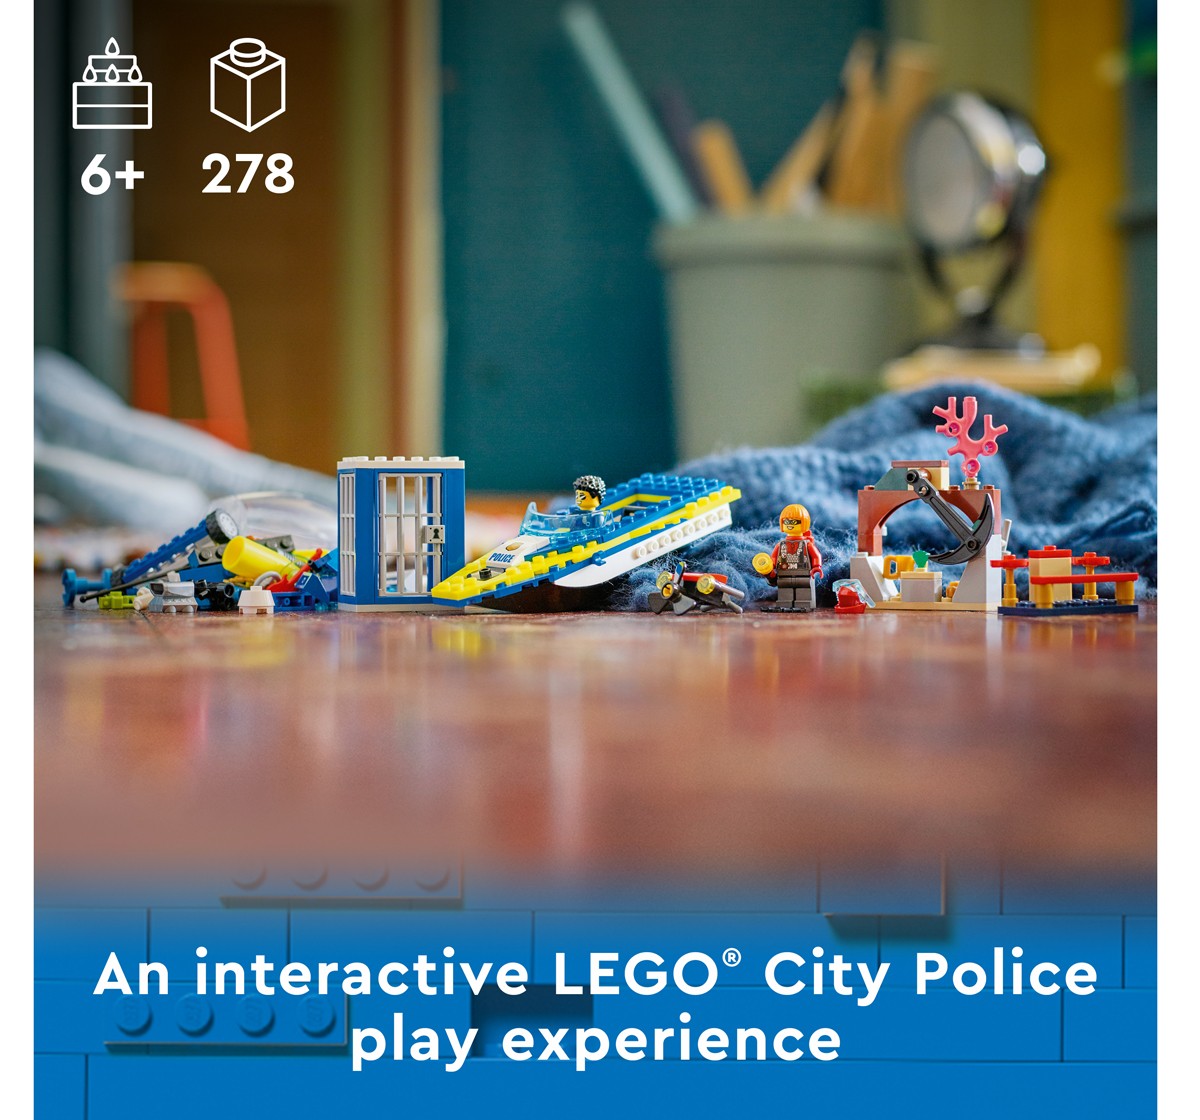 Lego City Water Police Detective Missions Interactive Digital Building Toy Set for Kids, Boys, and Girls Ages 6+ (278 Pieces)